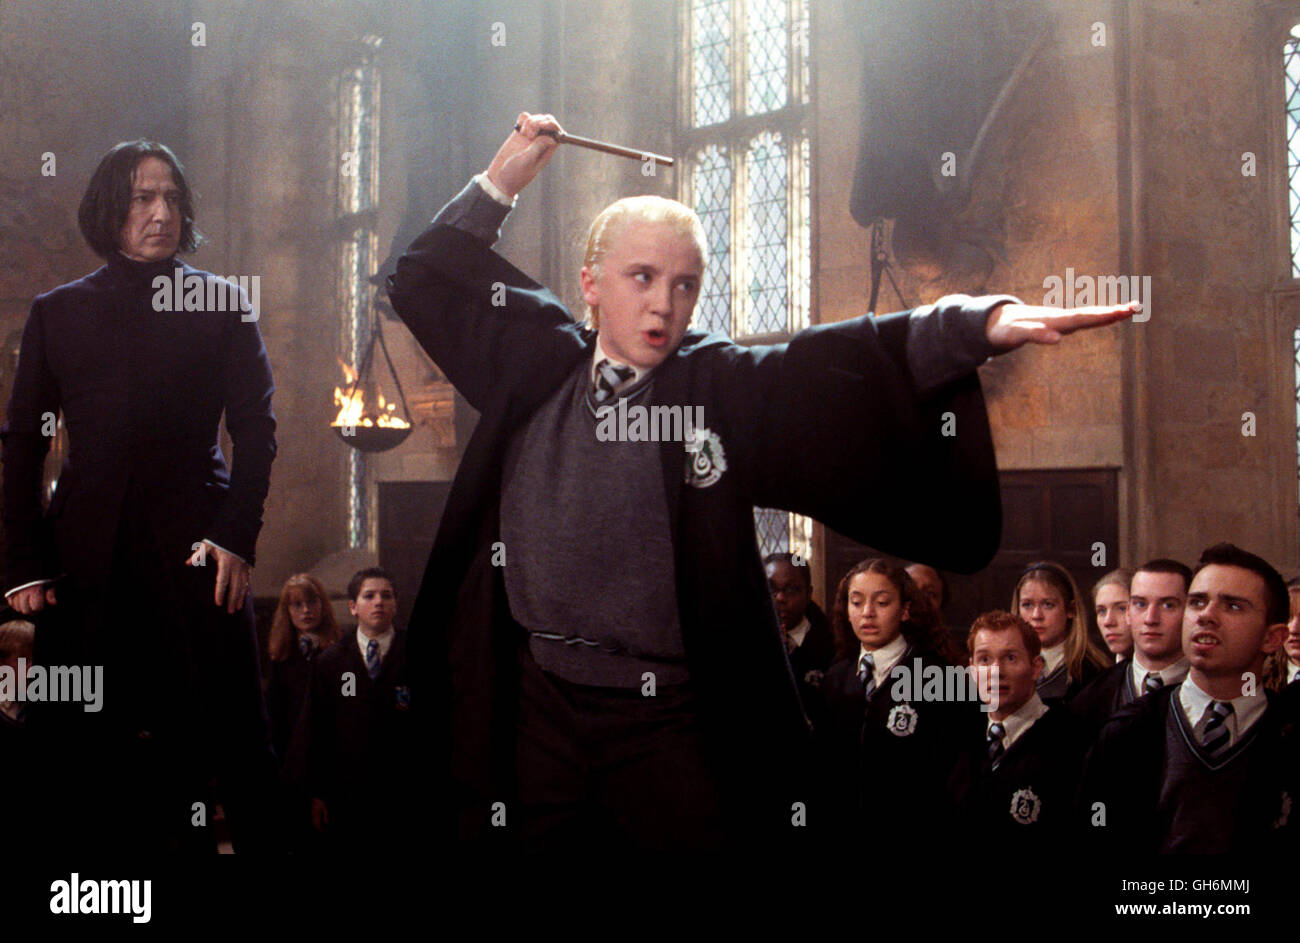 Draco malfoy harry potter hi-res stock photography and images - Alamy